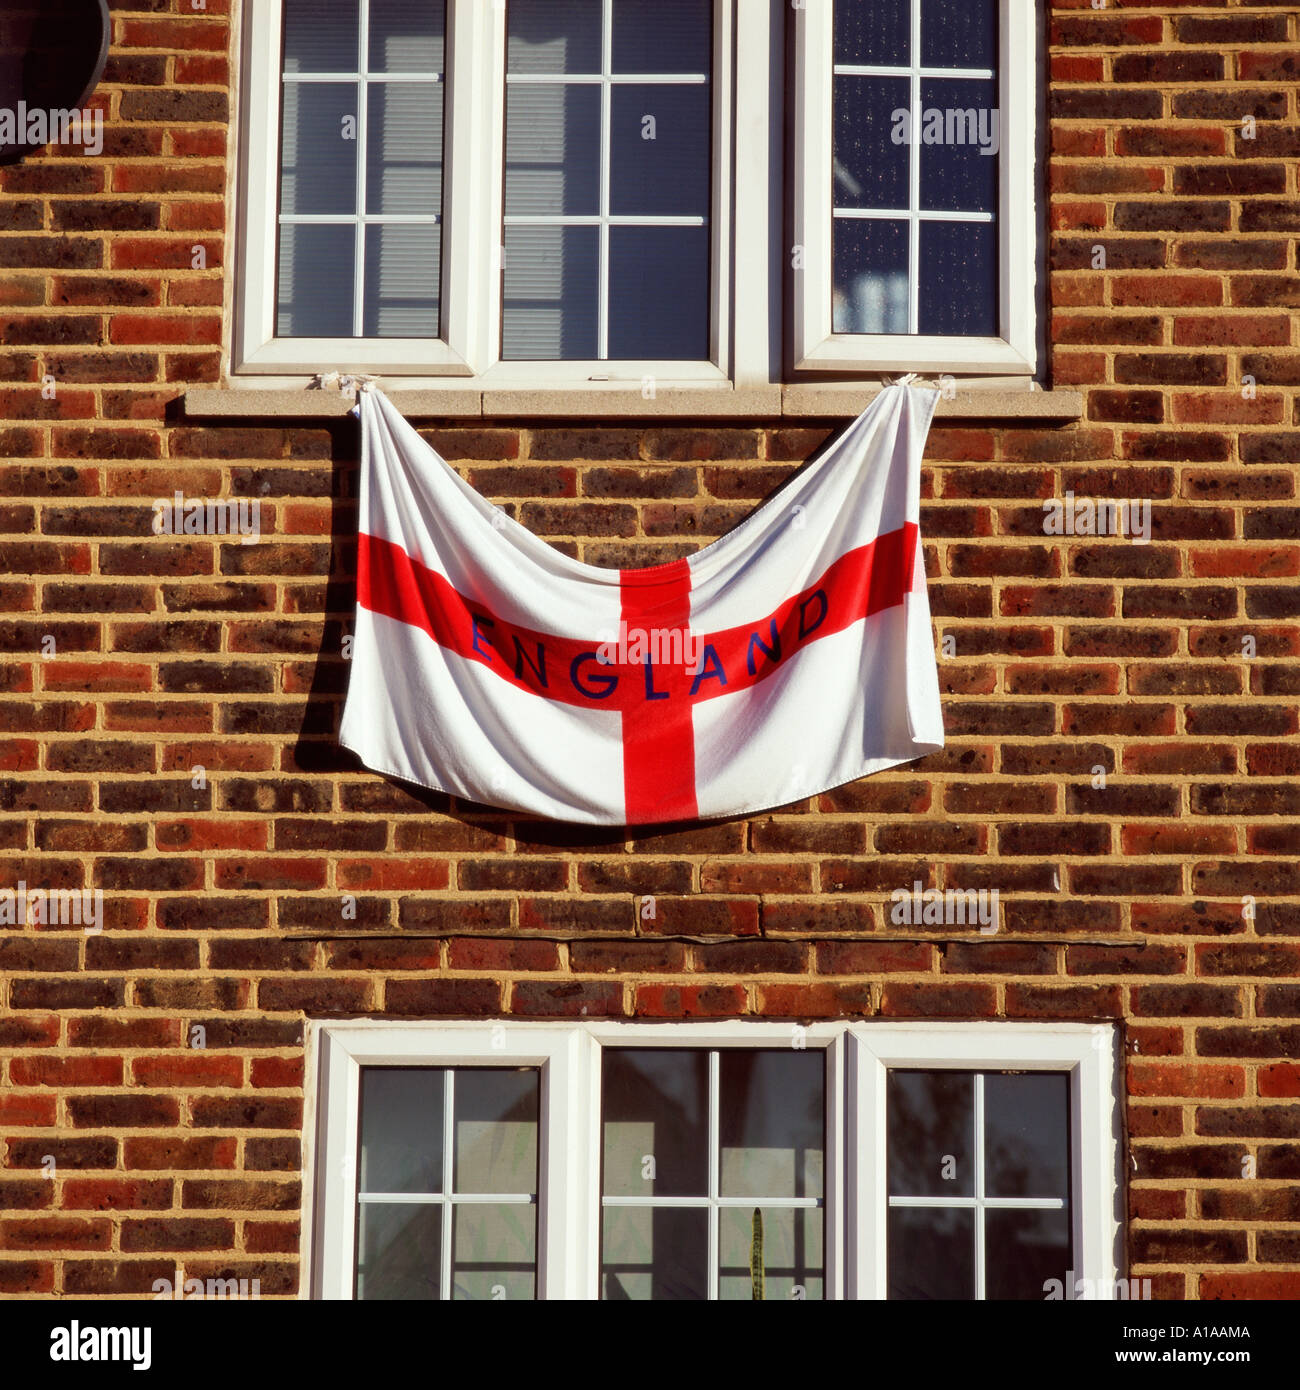 England flag hanging from a window Stock Photo